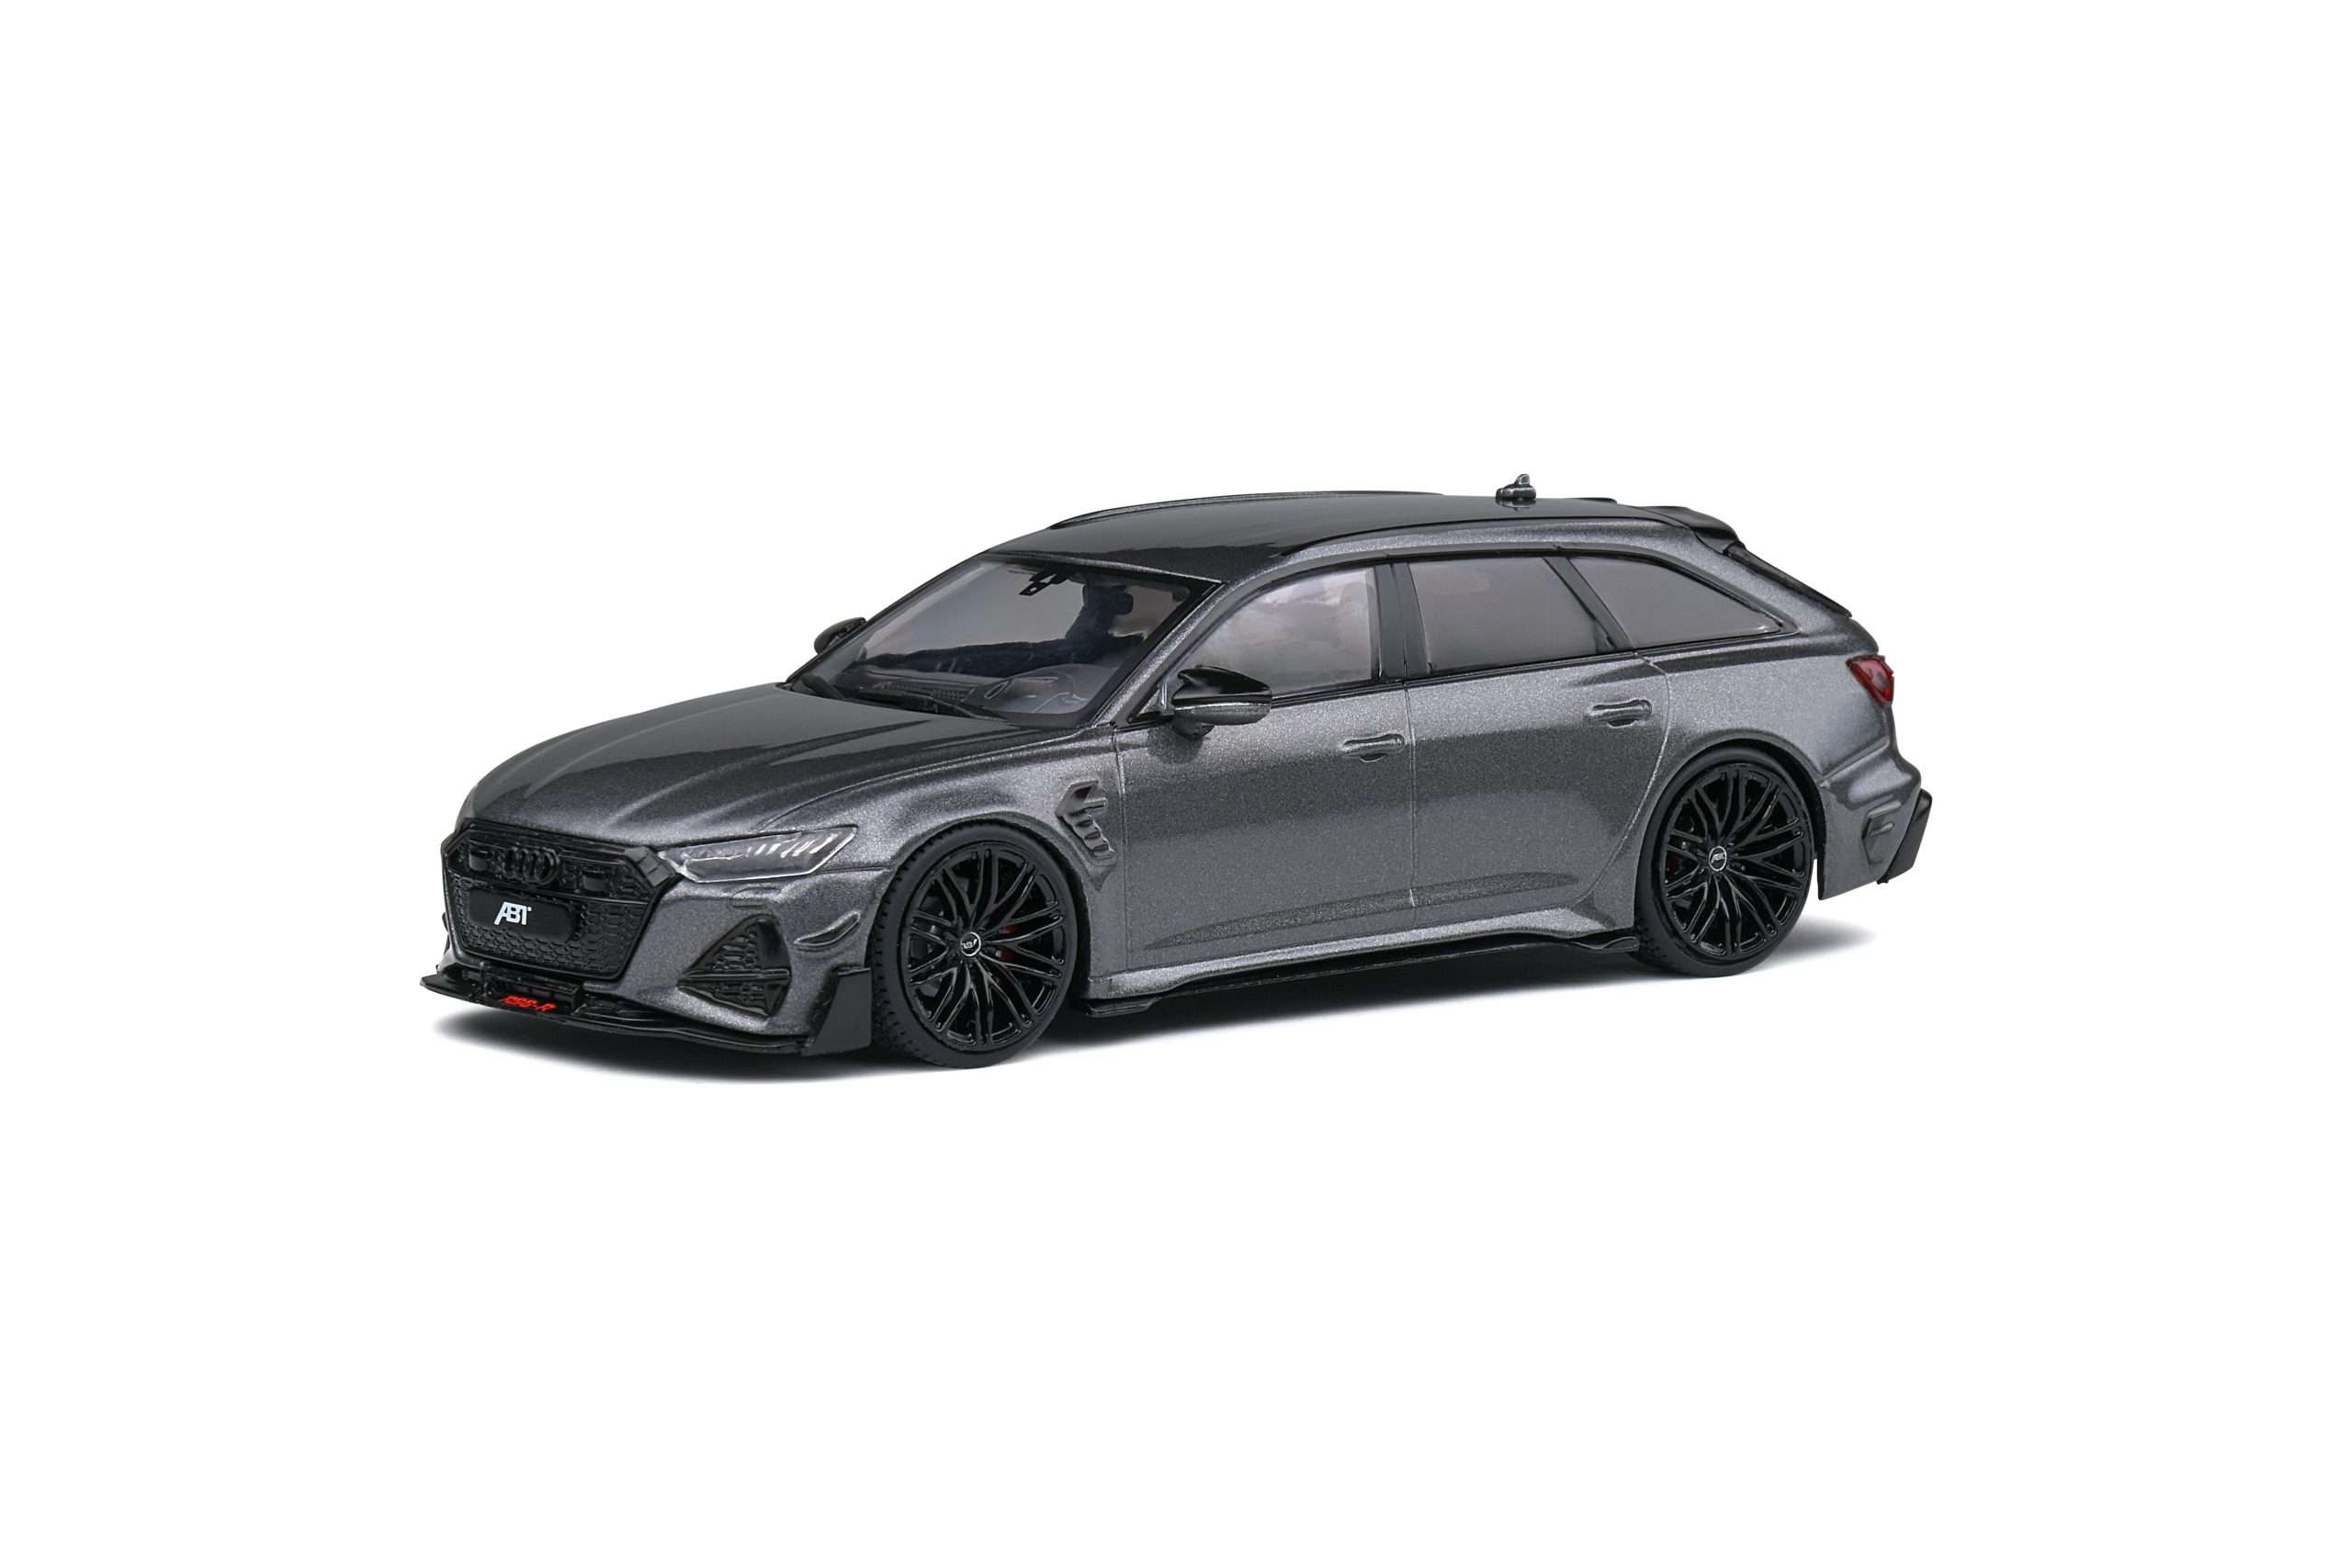 43Solido Audi Abt RS6 R 2022 421436870 7